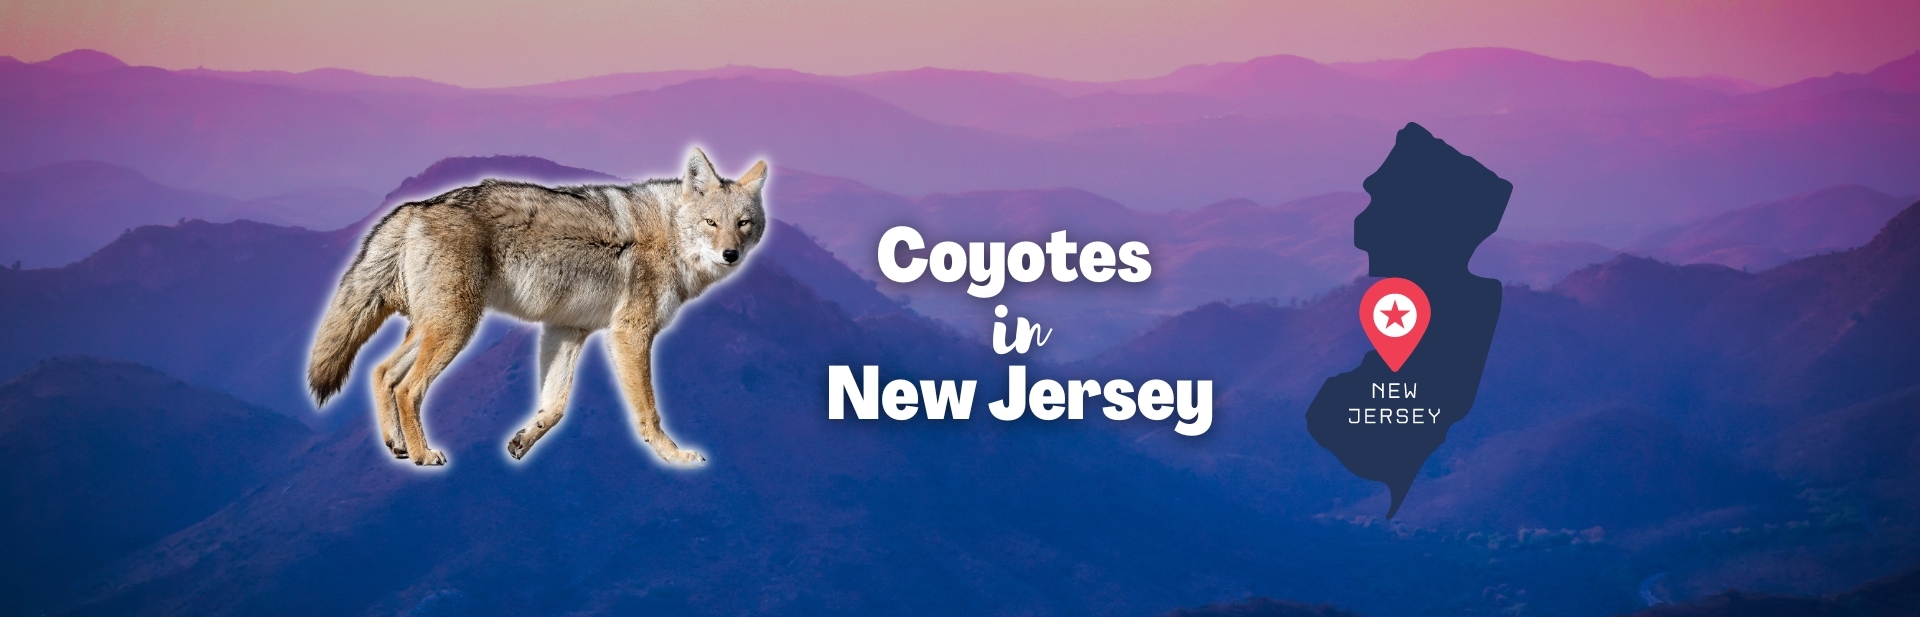 Coyotes in New Jersey: The Garden State’s Newest Canine Resident